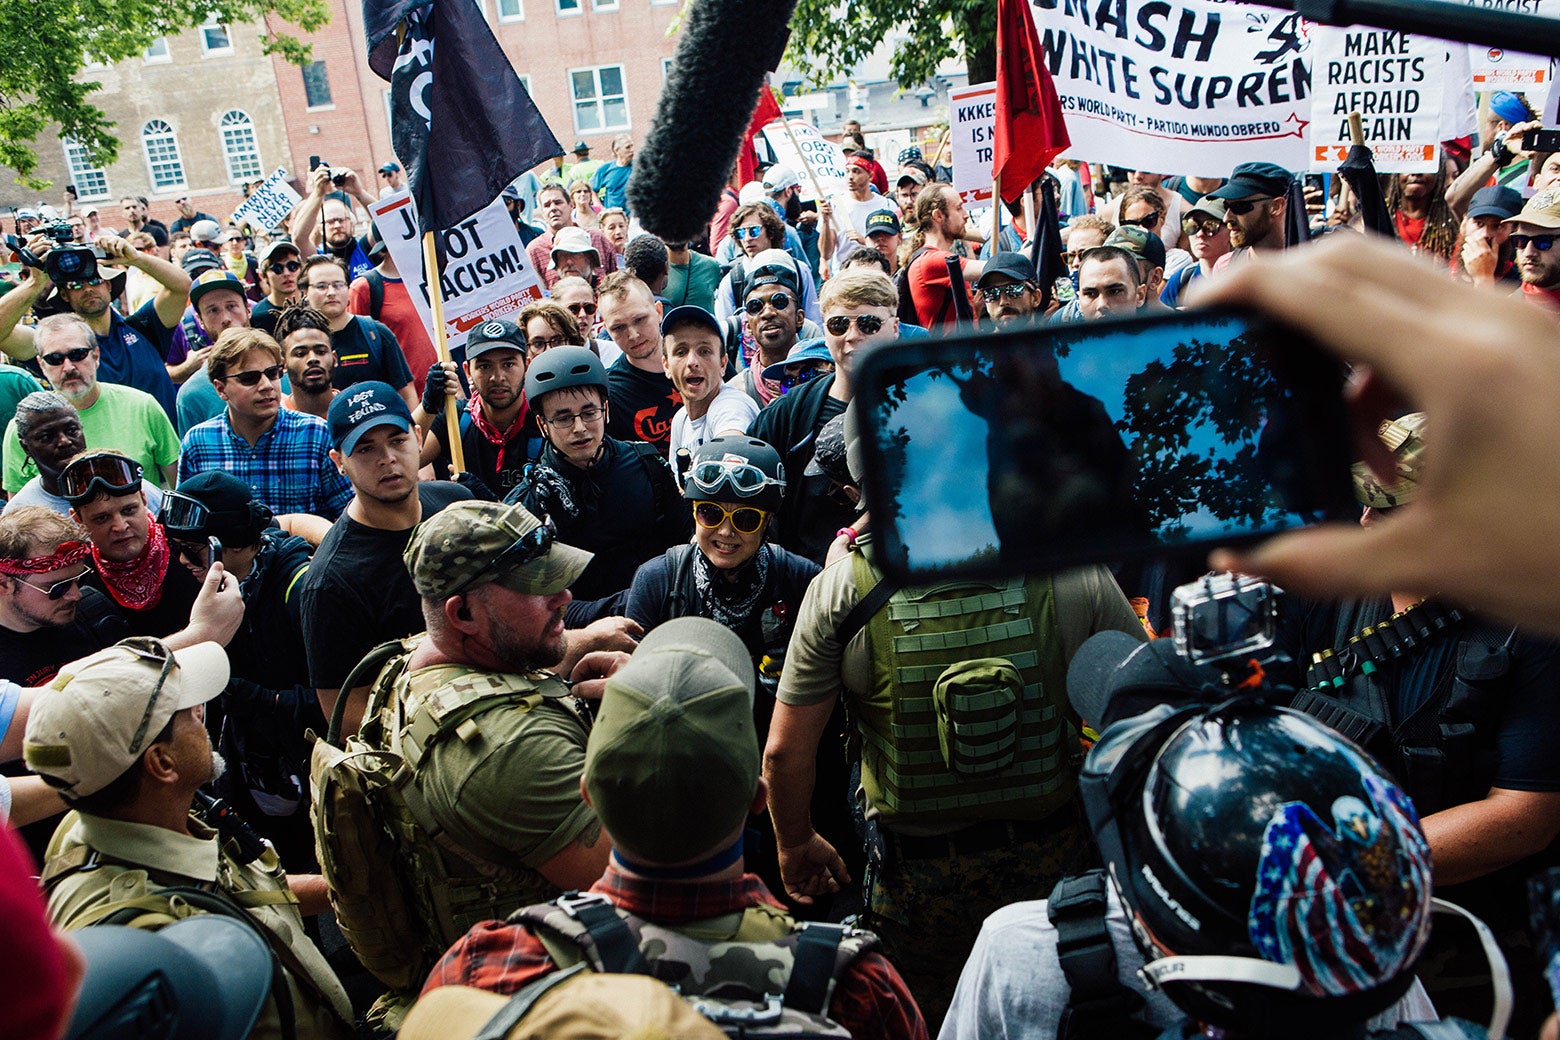 A diverse group of counterprotesters argues with protesters in military gear.